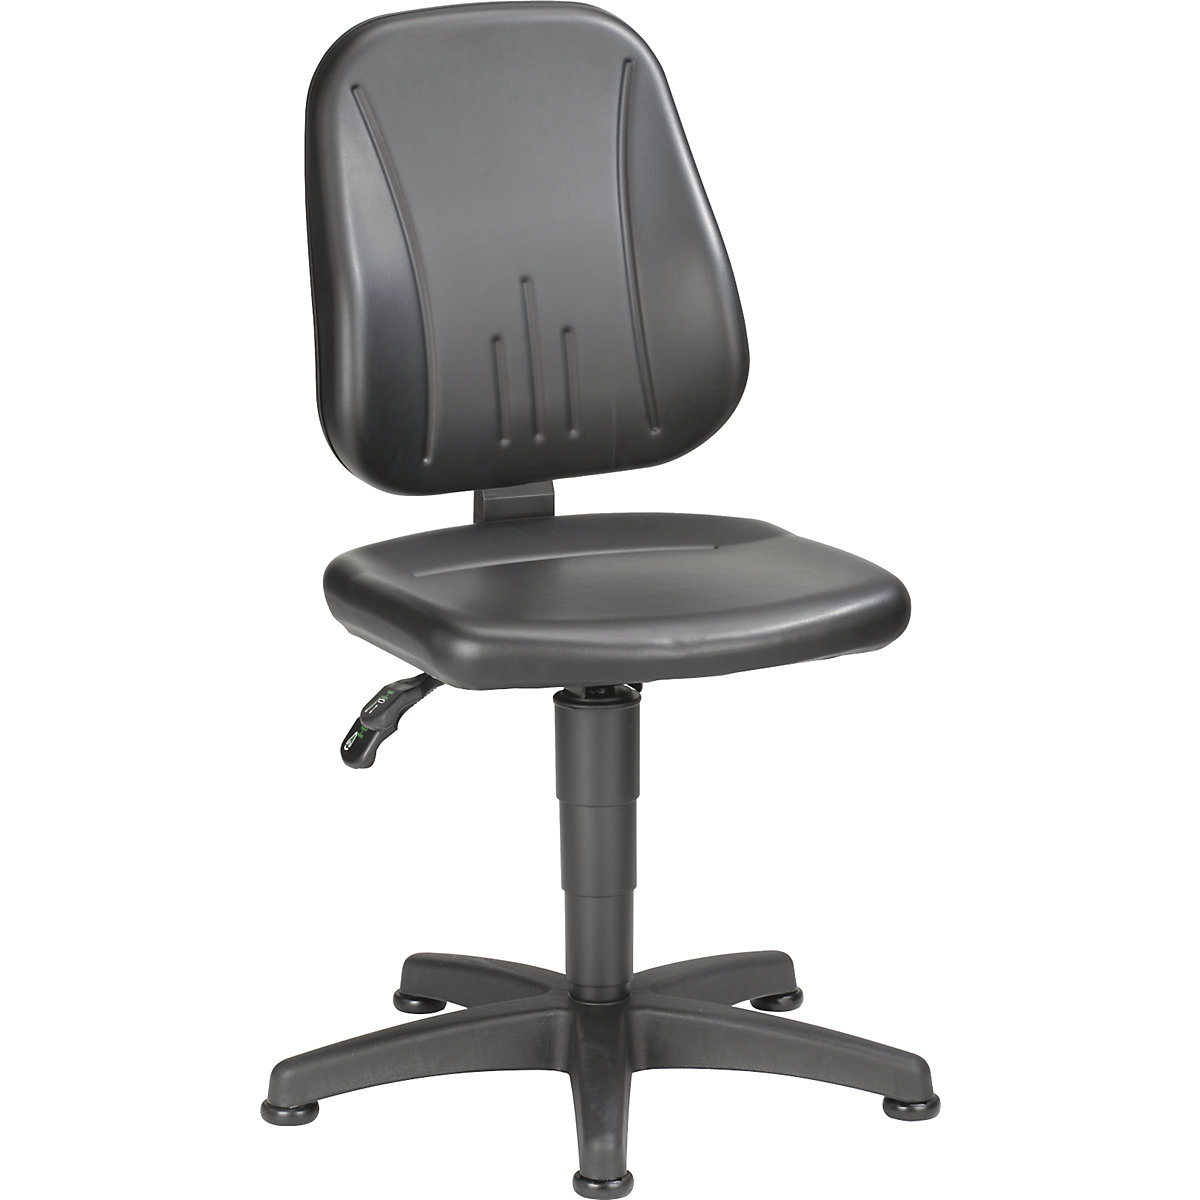 Industrial swivel chair – bimos, with gas lift height adjustment, vinyl cover, black, with floor glides-6